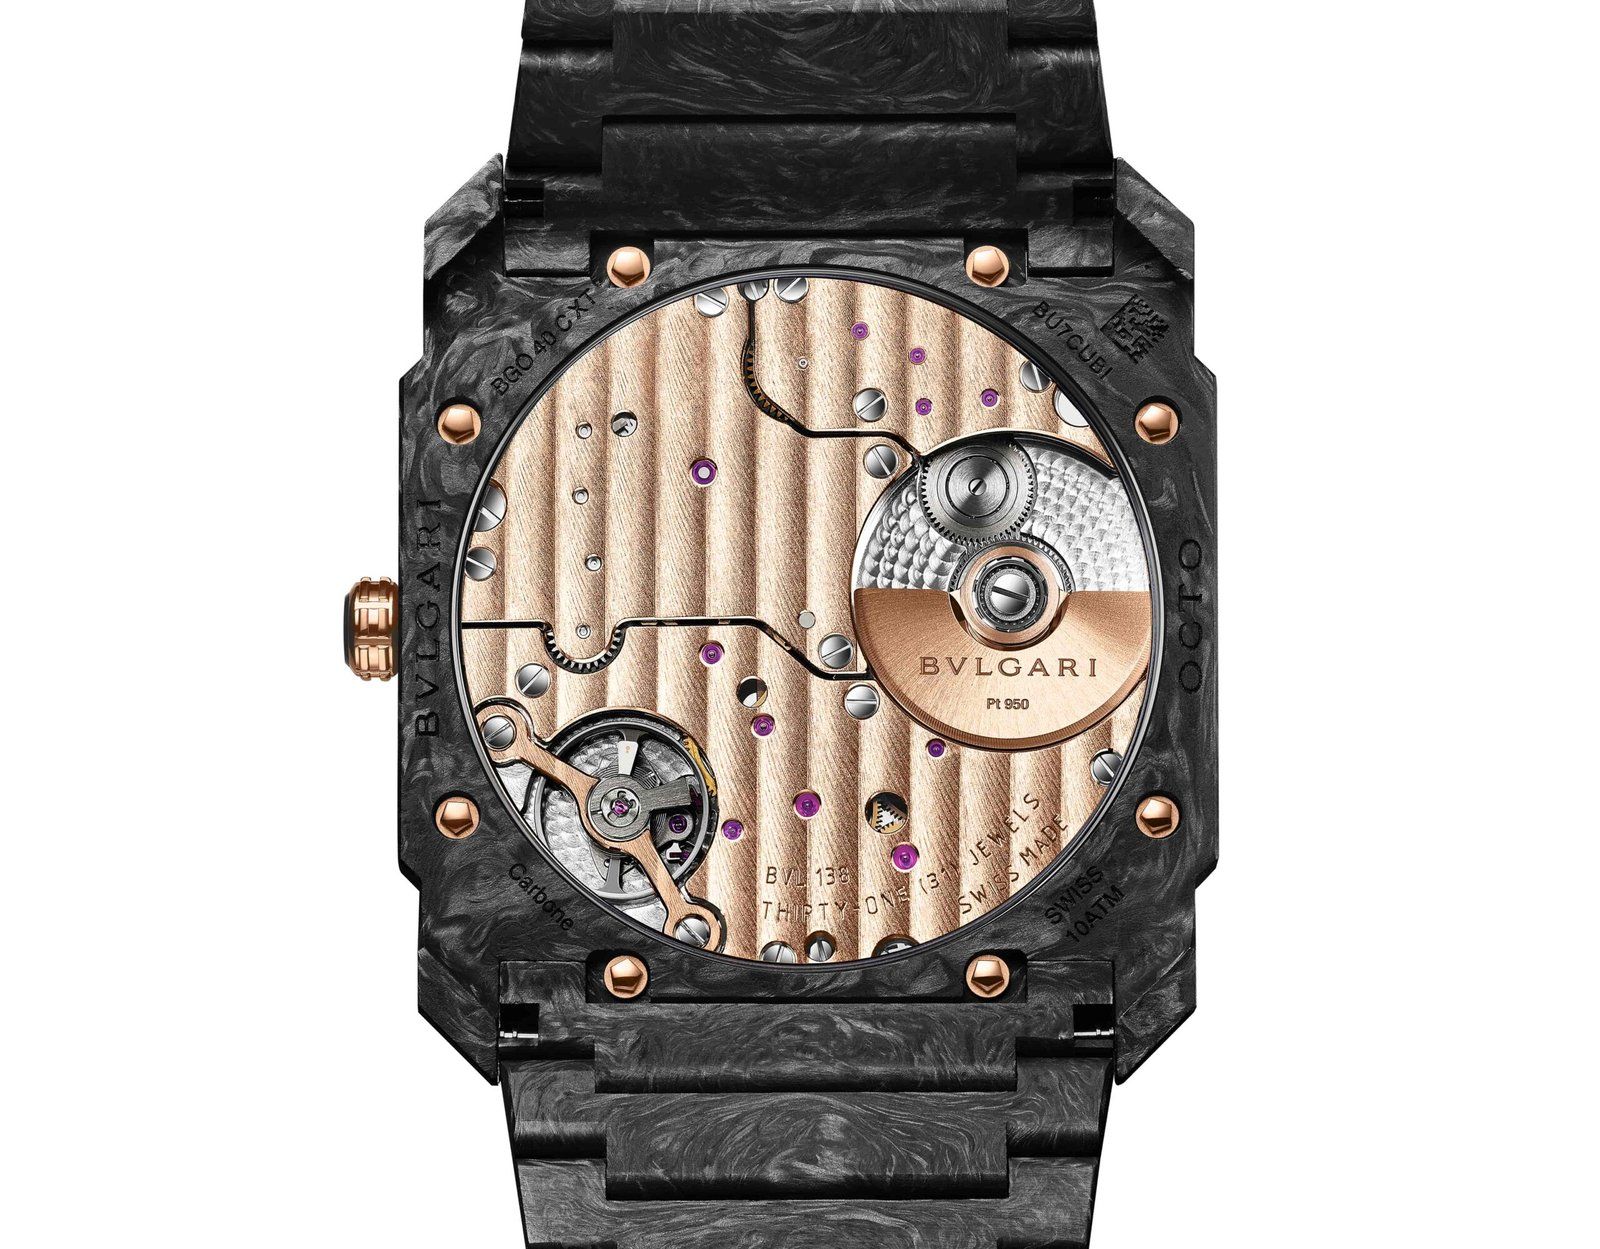 Hand-wound BVL 138 powers the Octo Finissimo CarbonGold Automatic